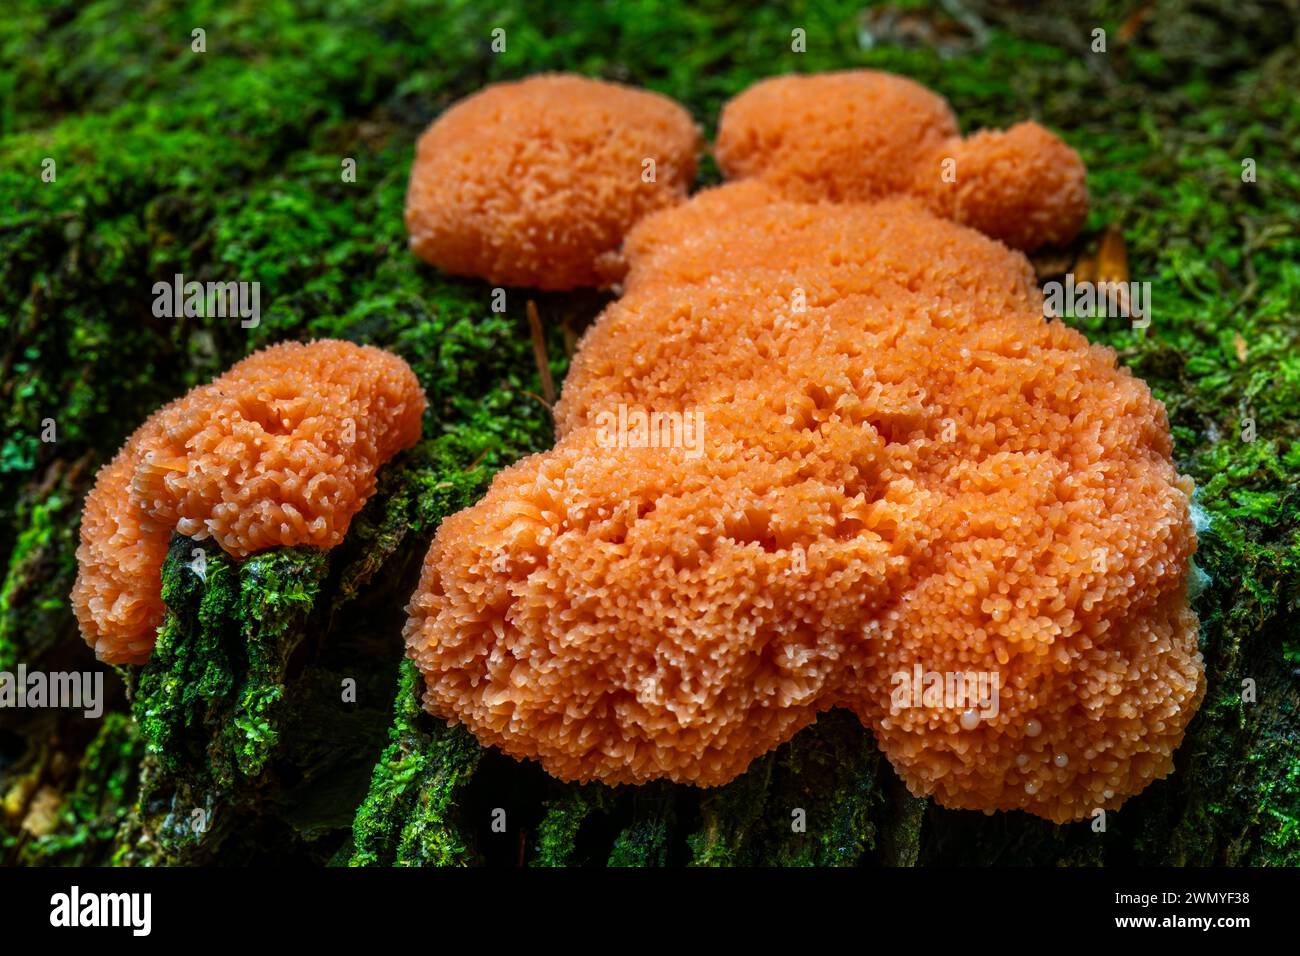 France, Somme, Forêt de Crécy, Crécy-en-Ponthieu, Mushrooms of the Crécy forest in autumn, tubifera ferruginosa Stock Photo